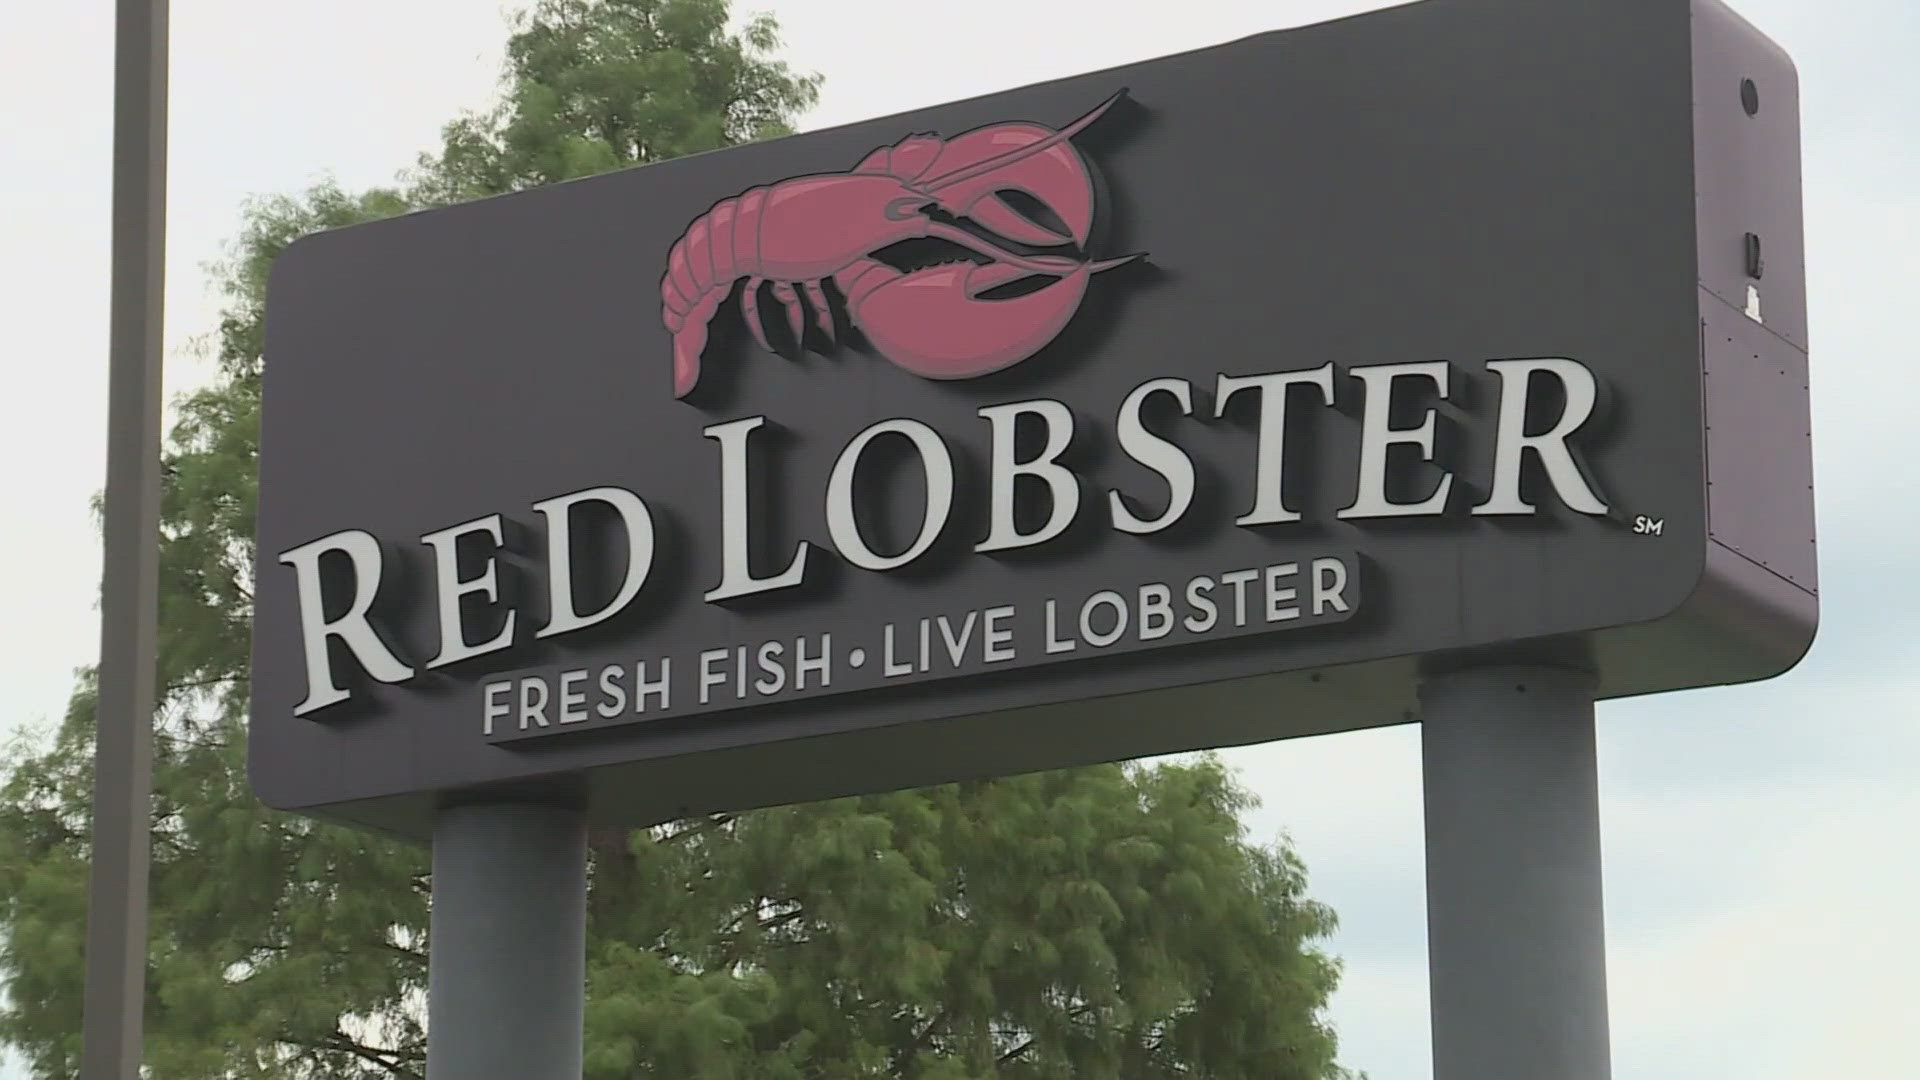 The company says it had to settle more than one billion dollars in debt. Red Lobster says it also plans to sell its business to its lenders.